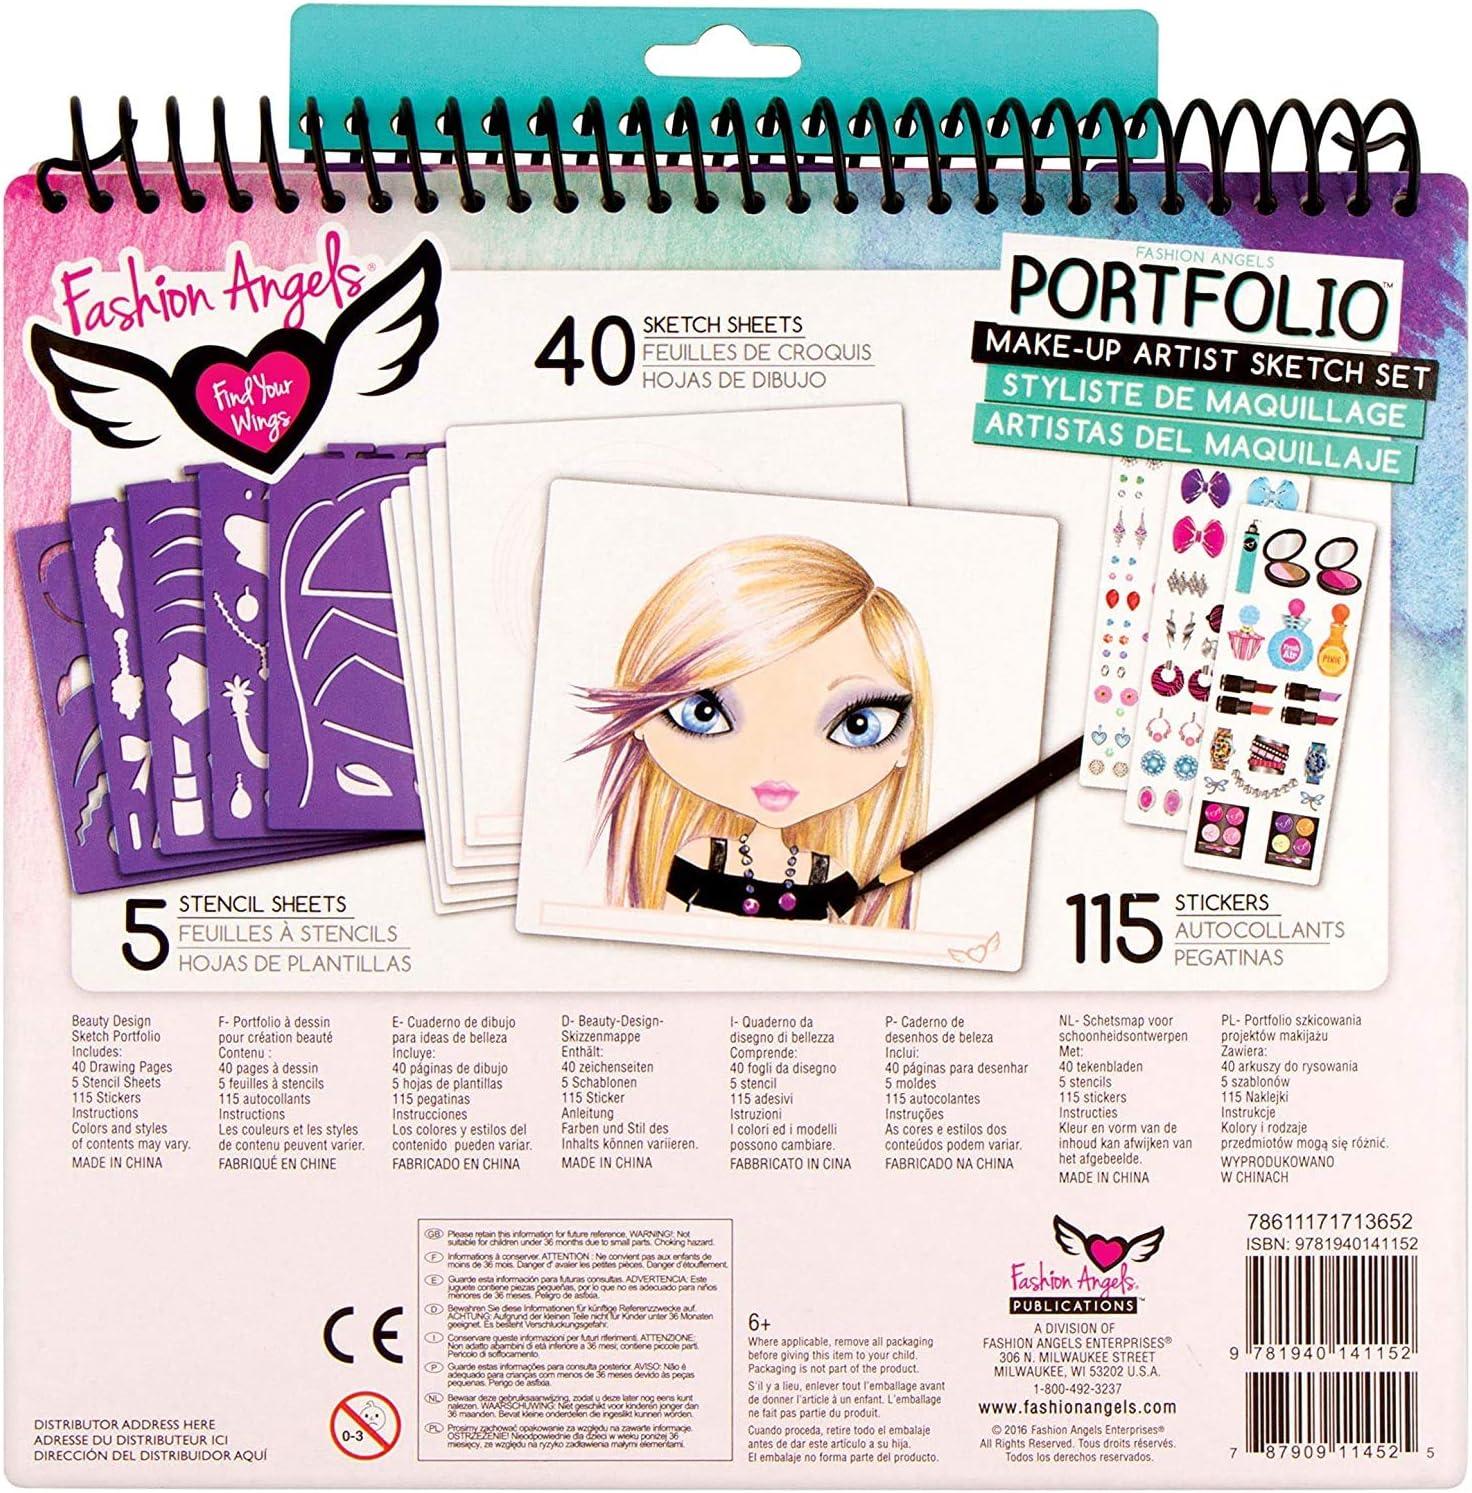 Fashion Angels I Love Fashion Sketch Portfolio for Kids - Fashion Design Sketch  Book for Beginners, Fashion Sketch Pad with Stencils and Stickers For Kids  6 and Up : Amazon.in: Office Products